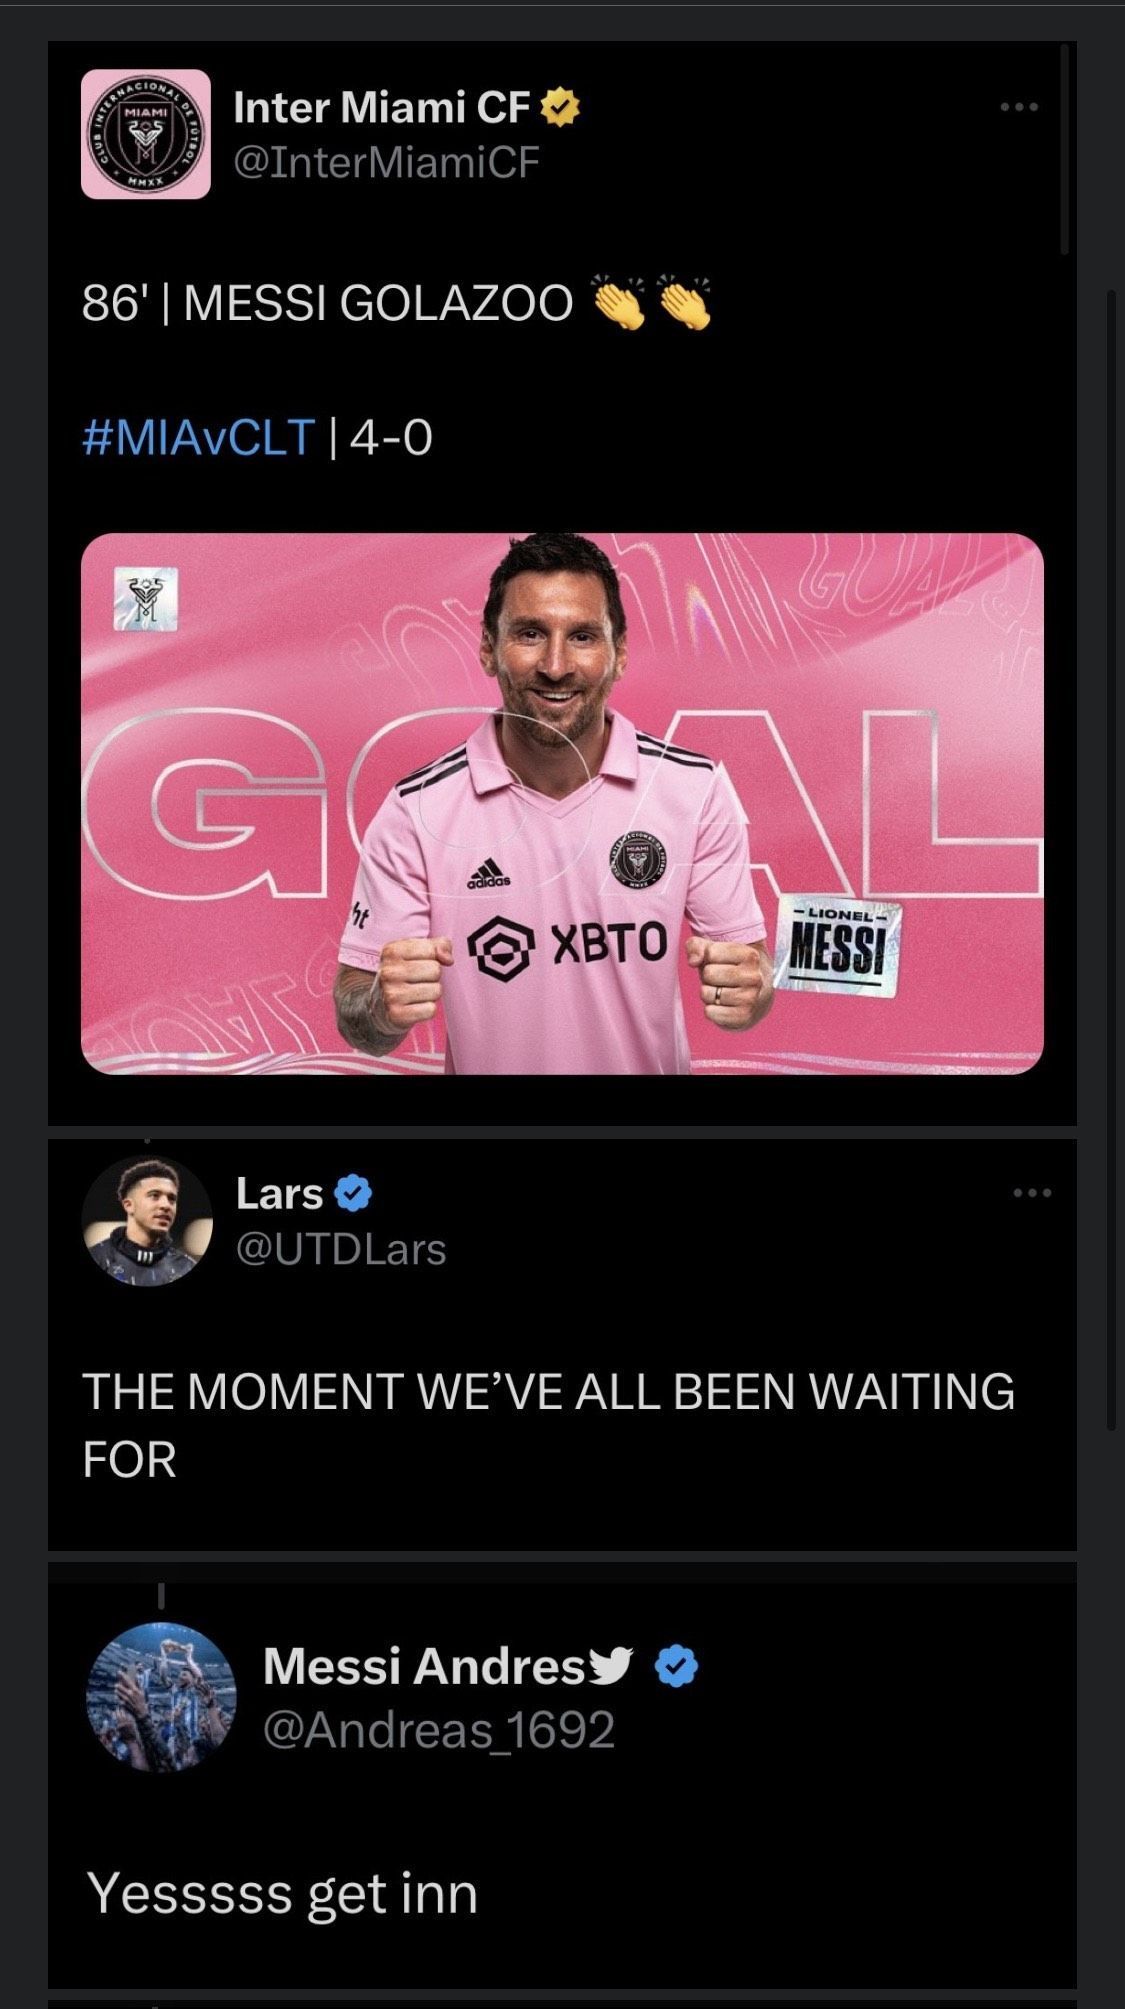 Fans laud Messi after he nets once again.